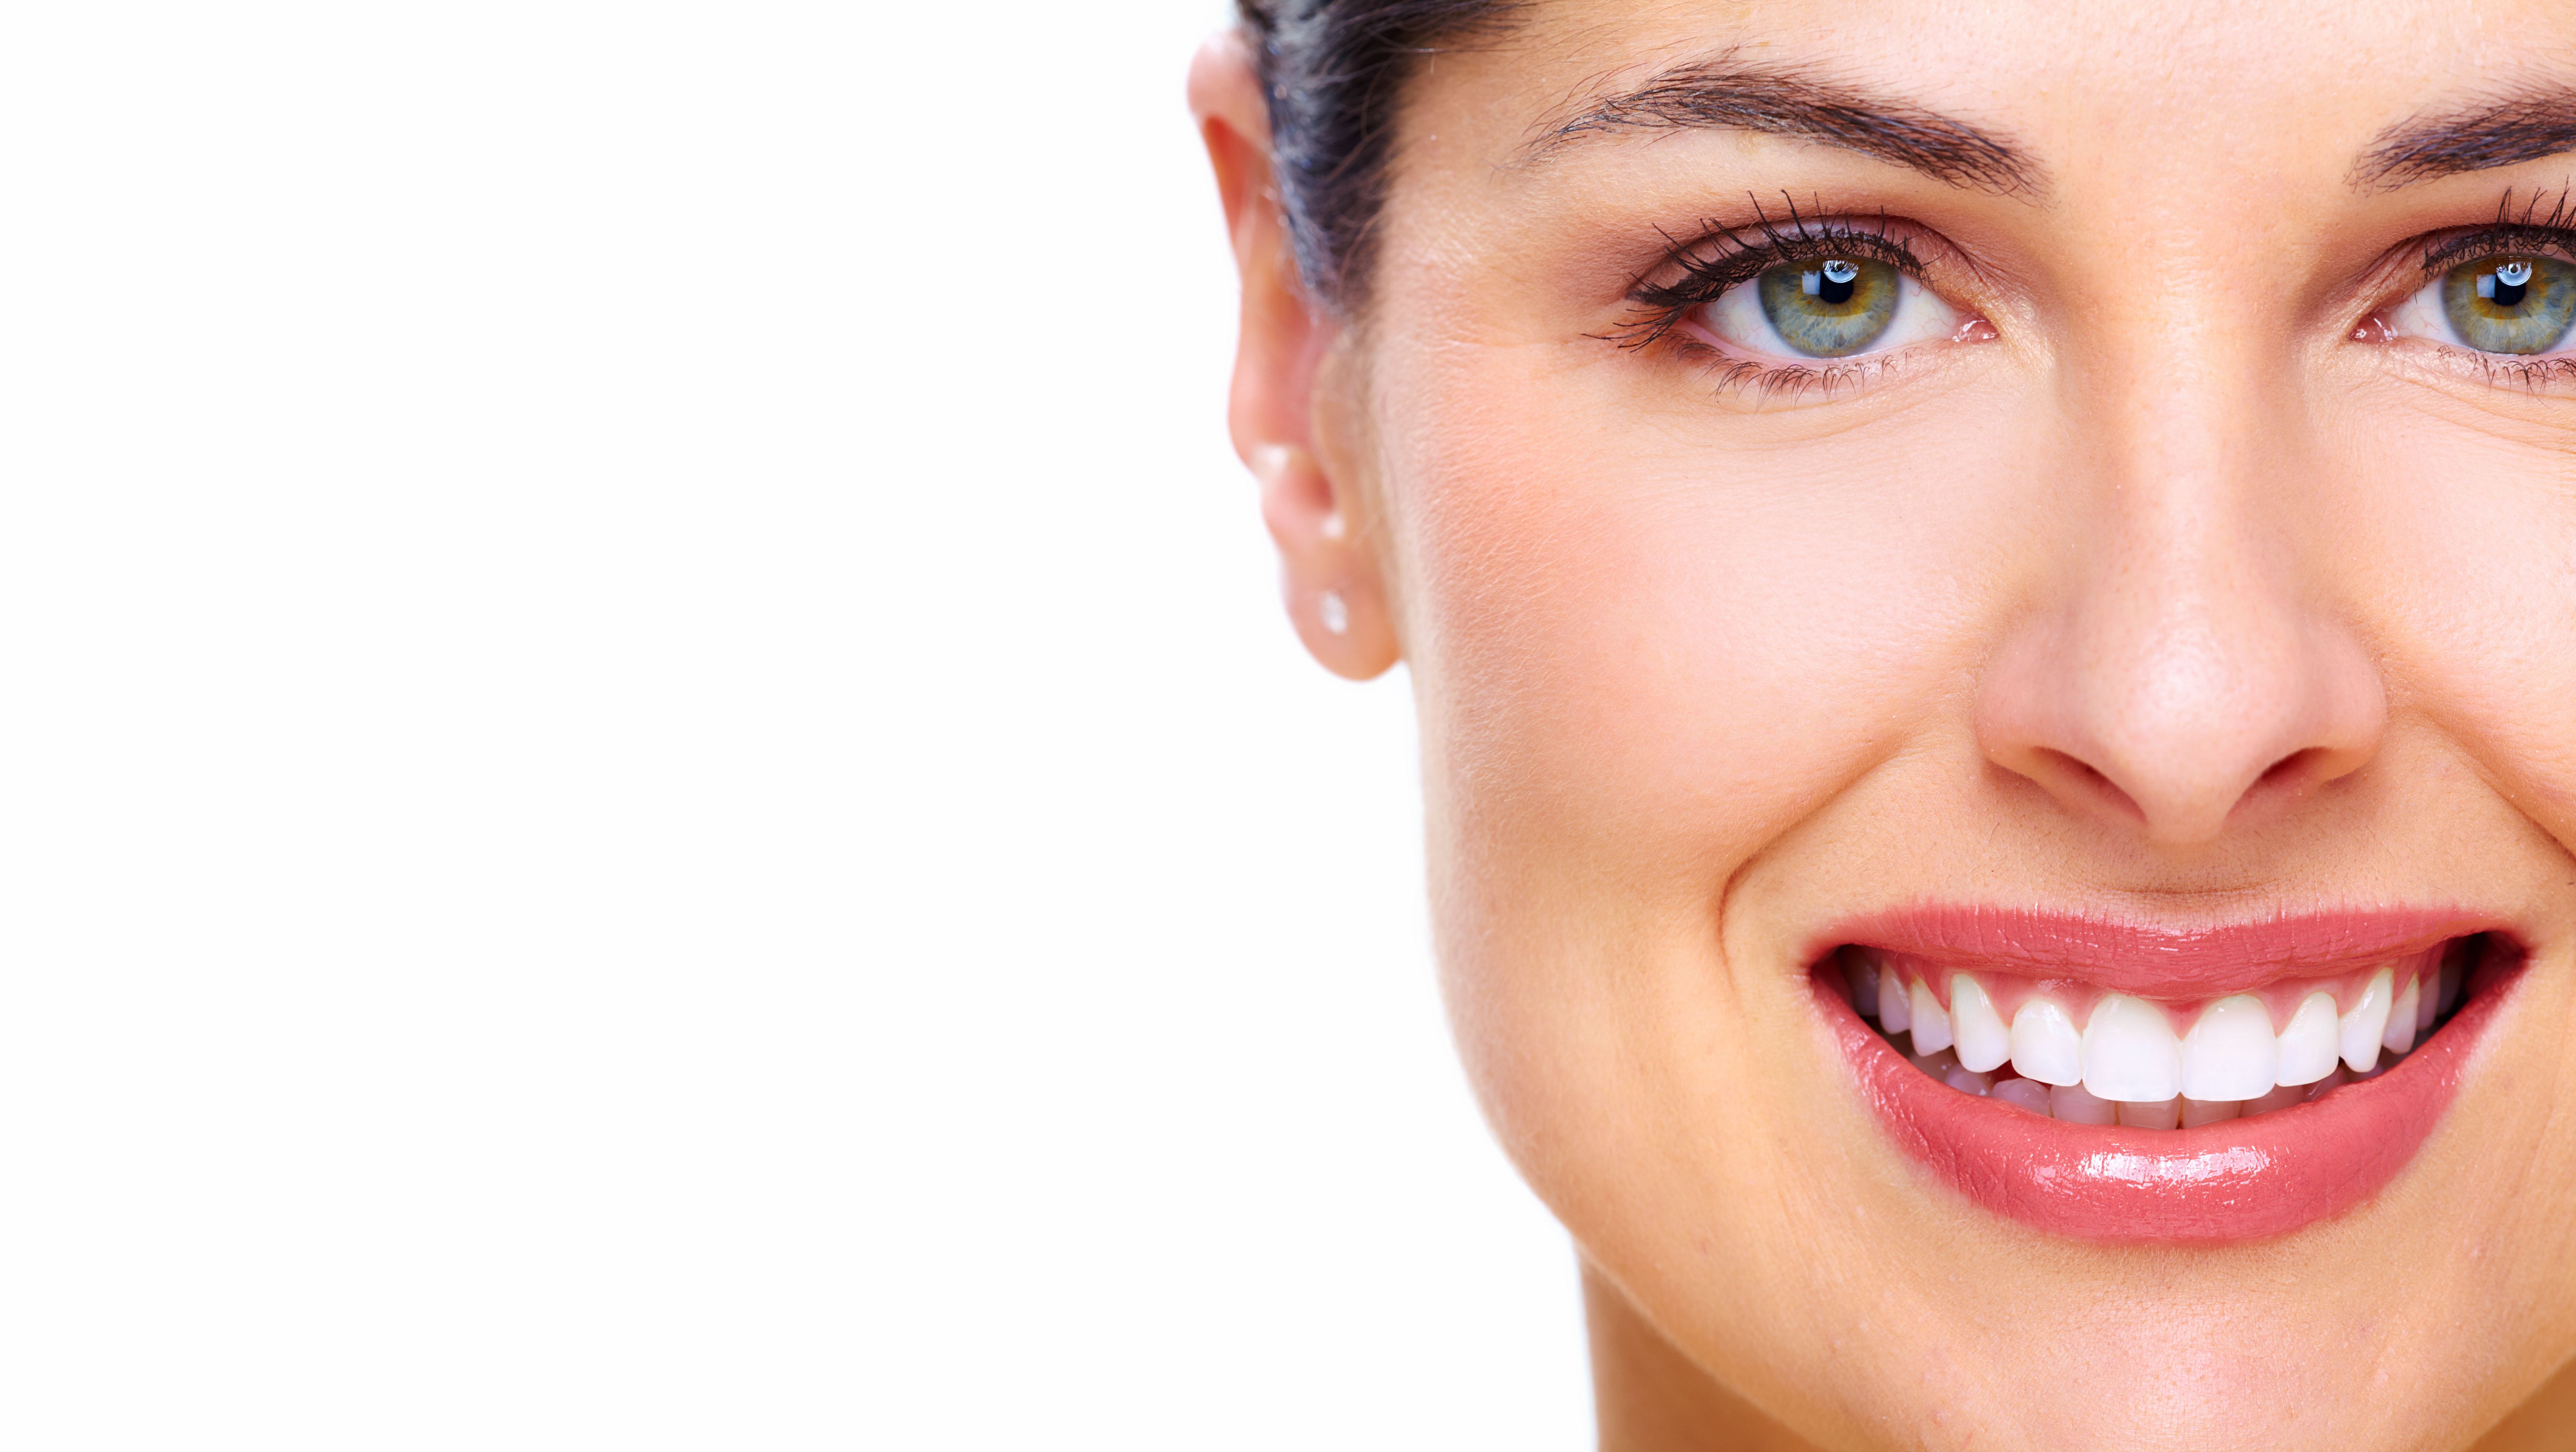 Cosmetic Dentistry Options To Change Your Smile Without Braces 2